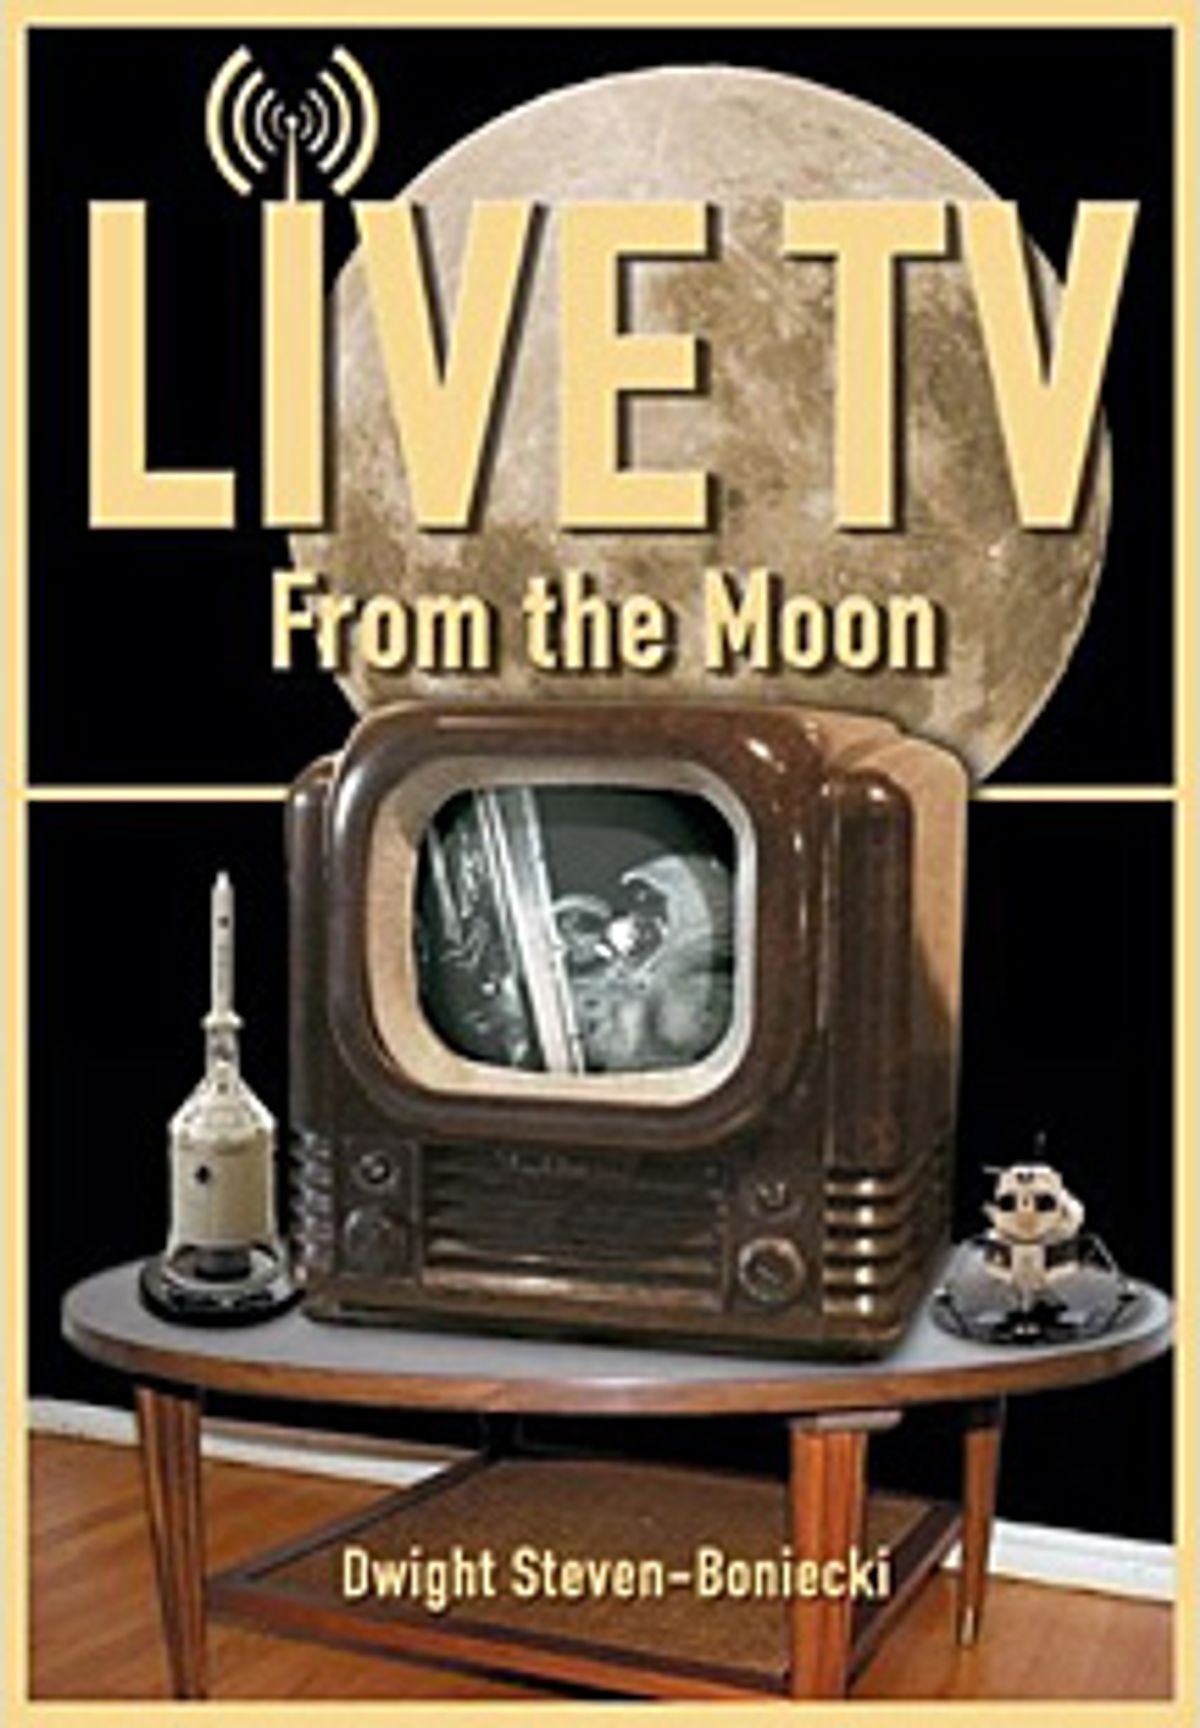 Book Review: Live TV From the Moon